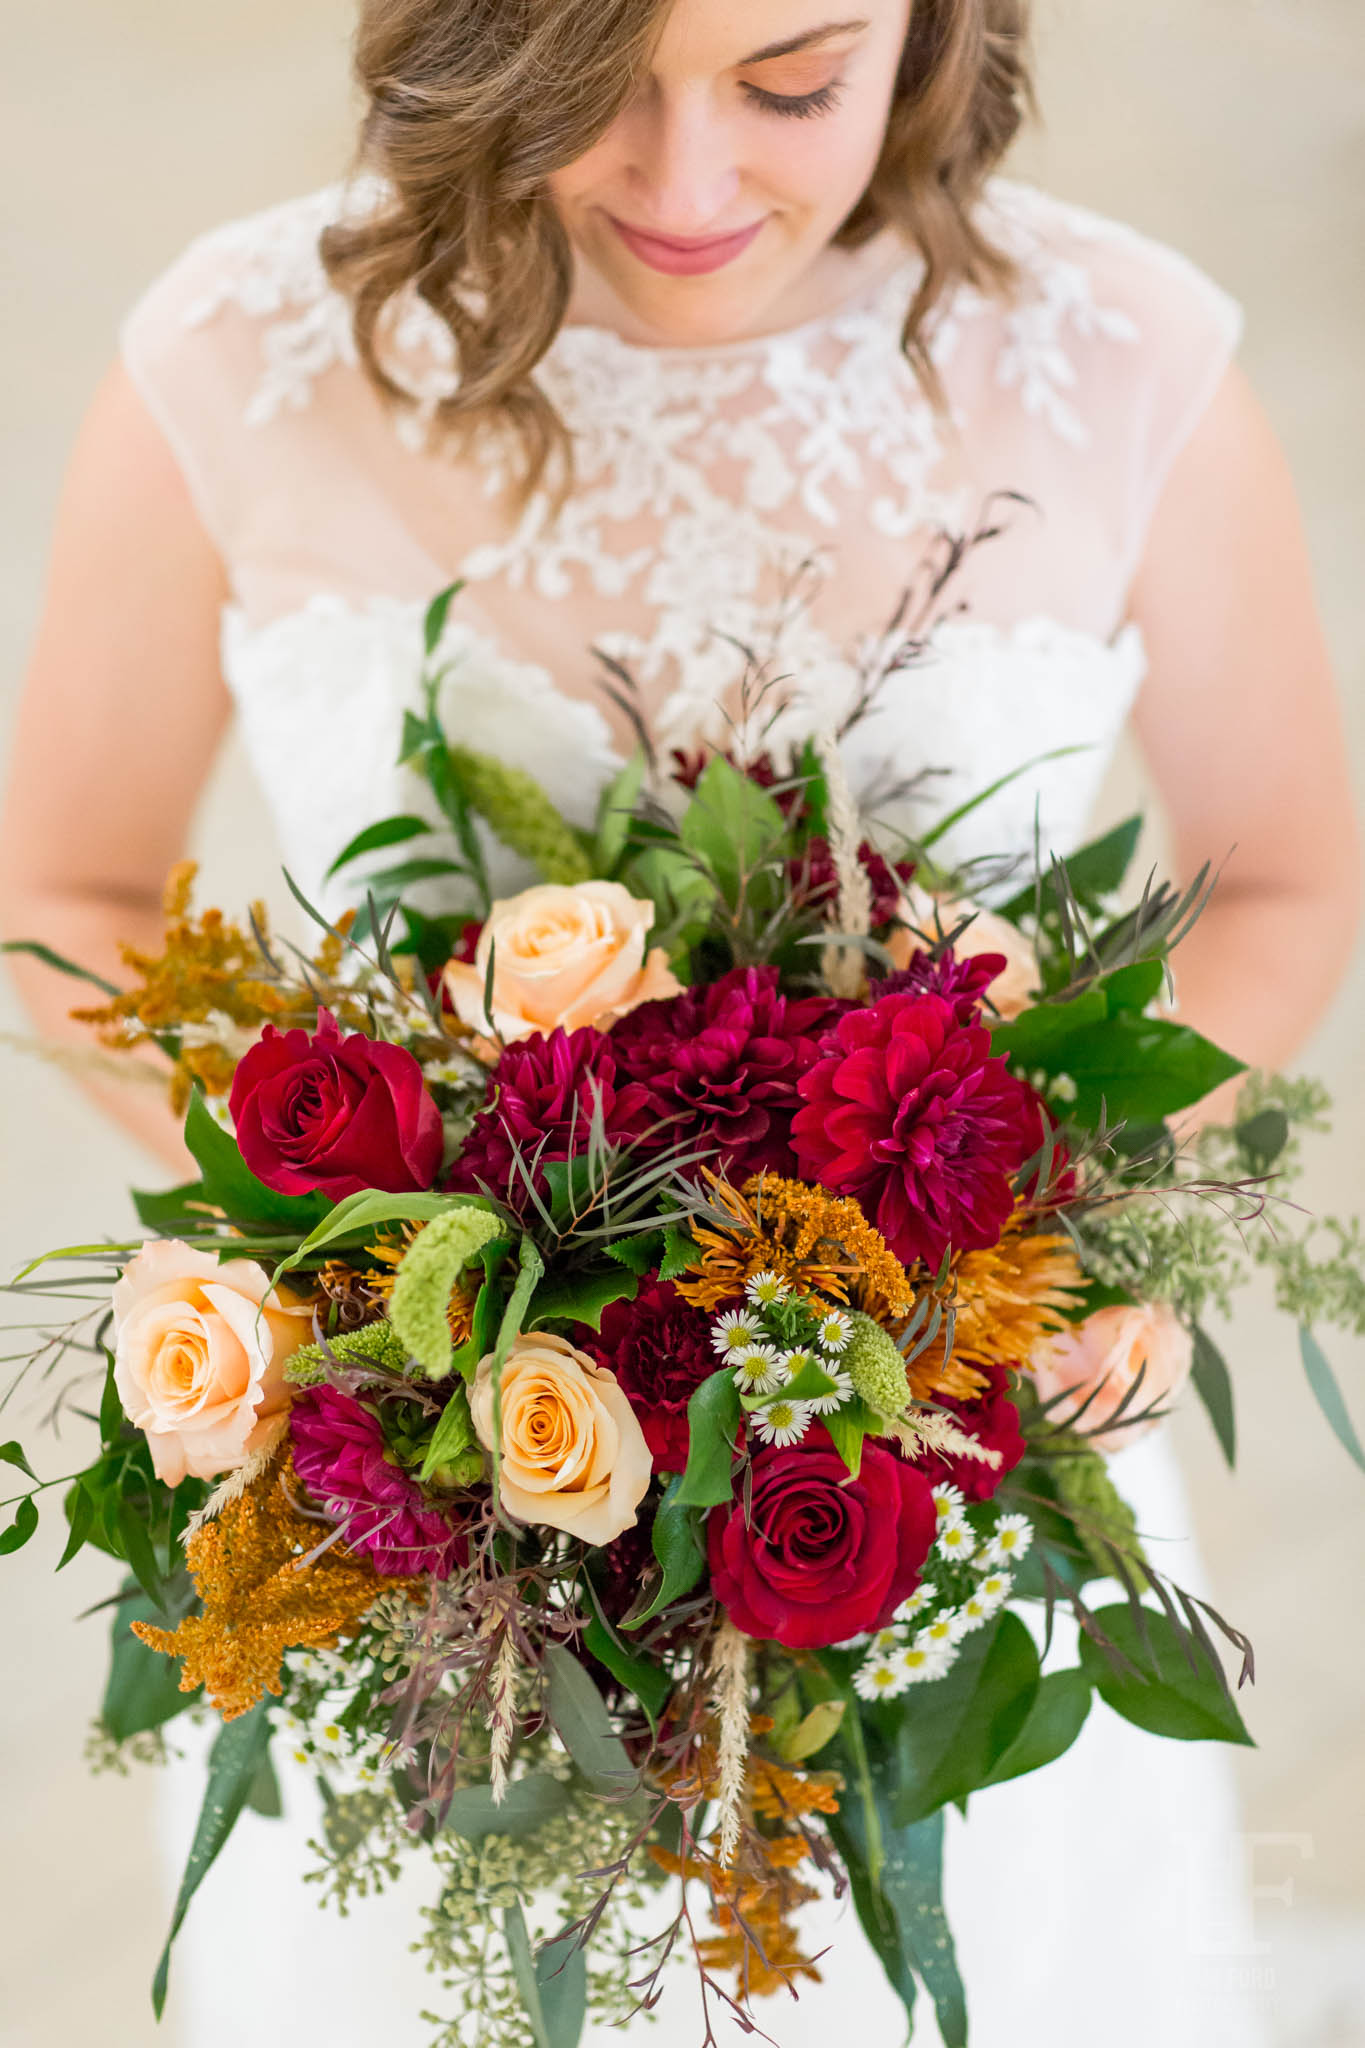 A bride with stunning natural makeup and beautiful wedding bouquet